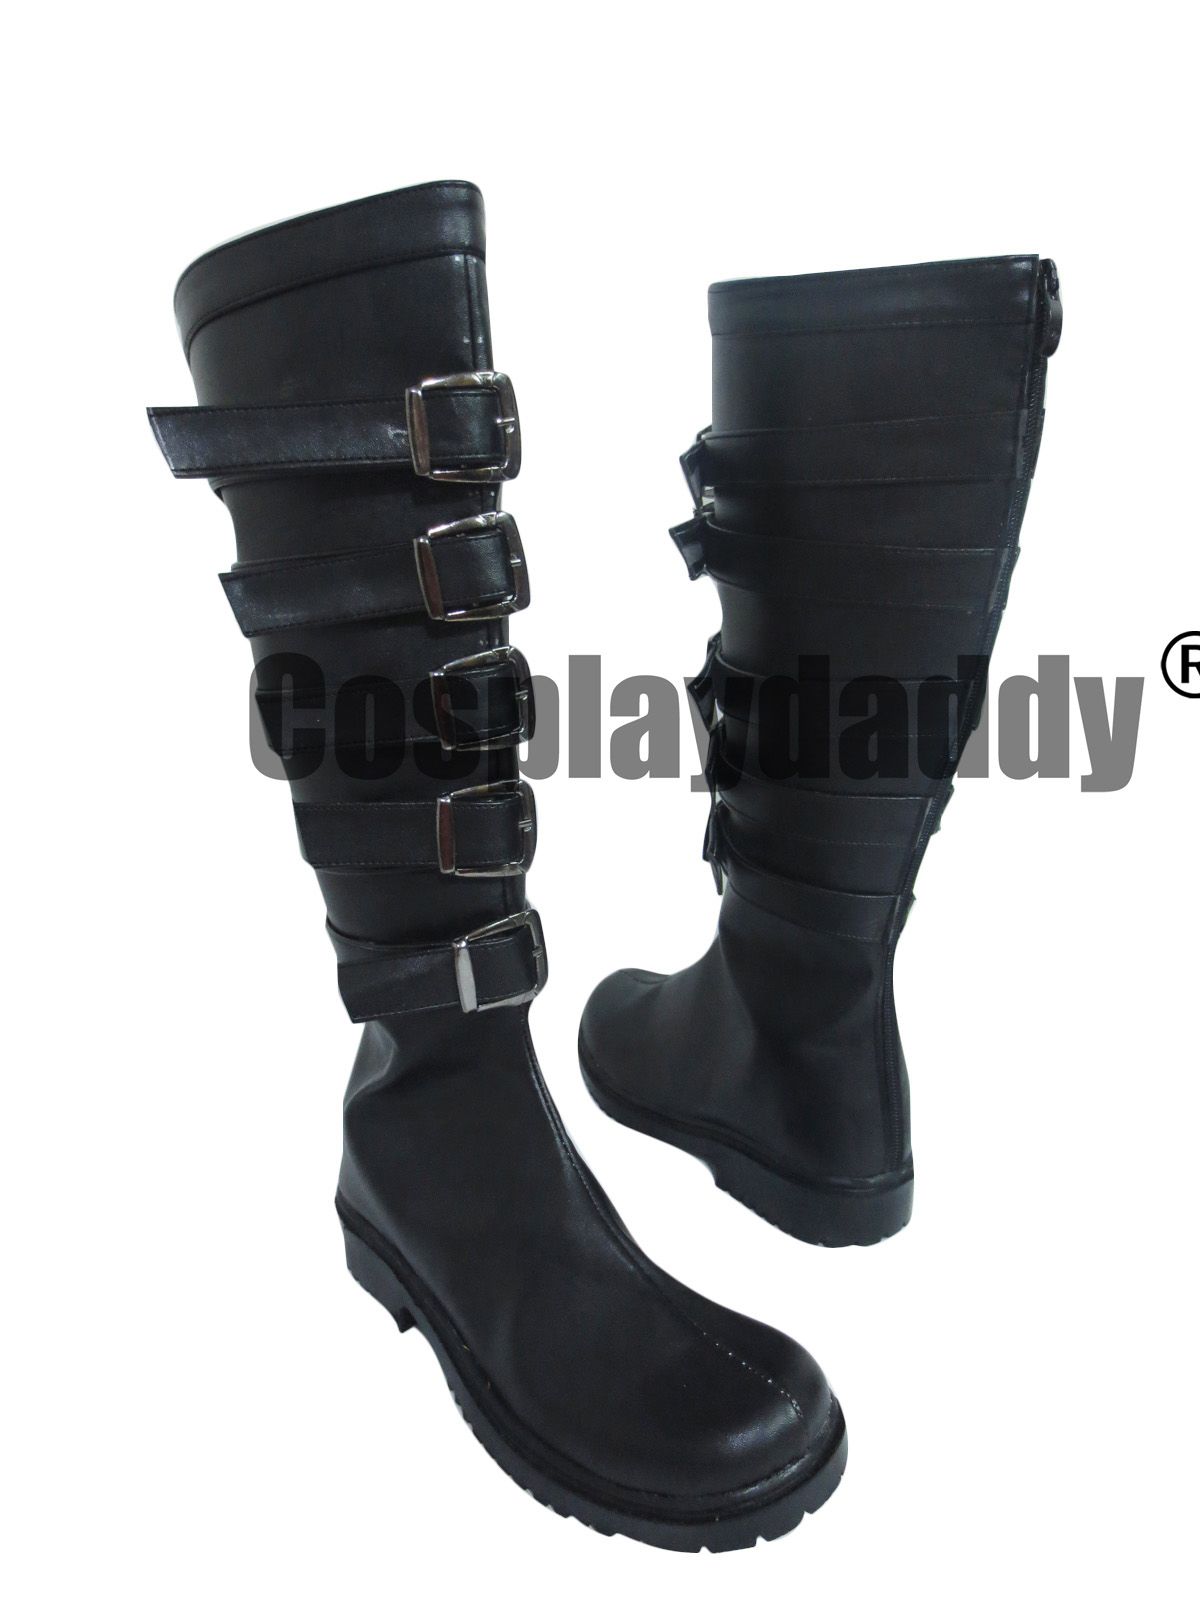 Alice Madness Returns Alice Cosplay Shoes Boots Adult Women From  Timyuan2000, $ 